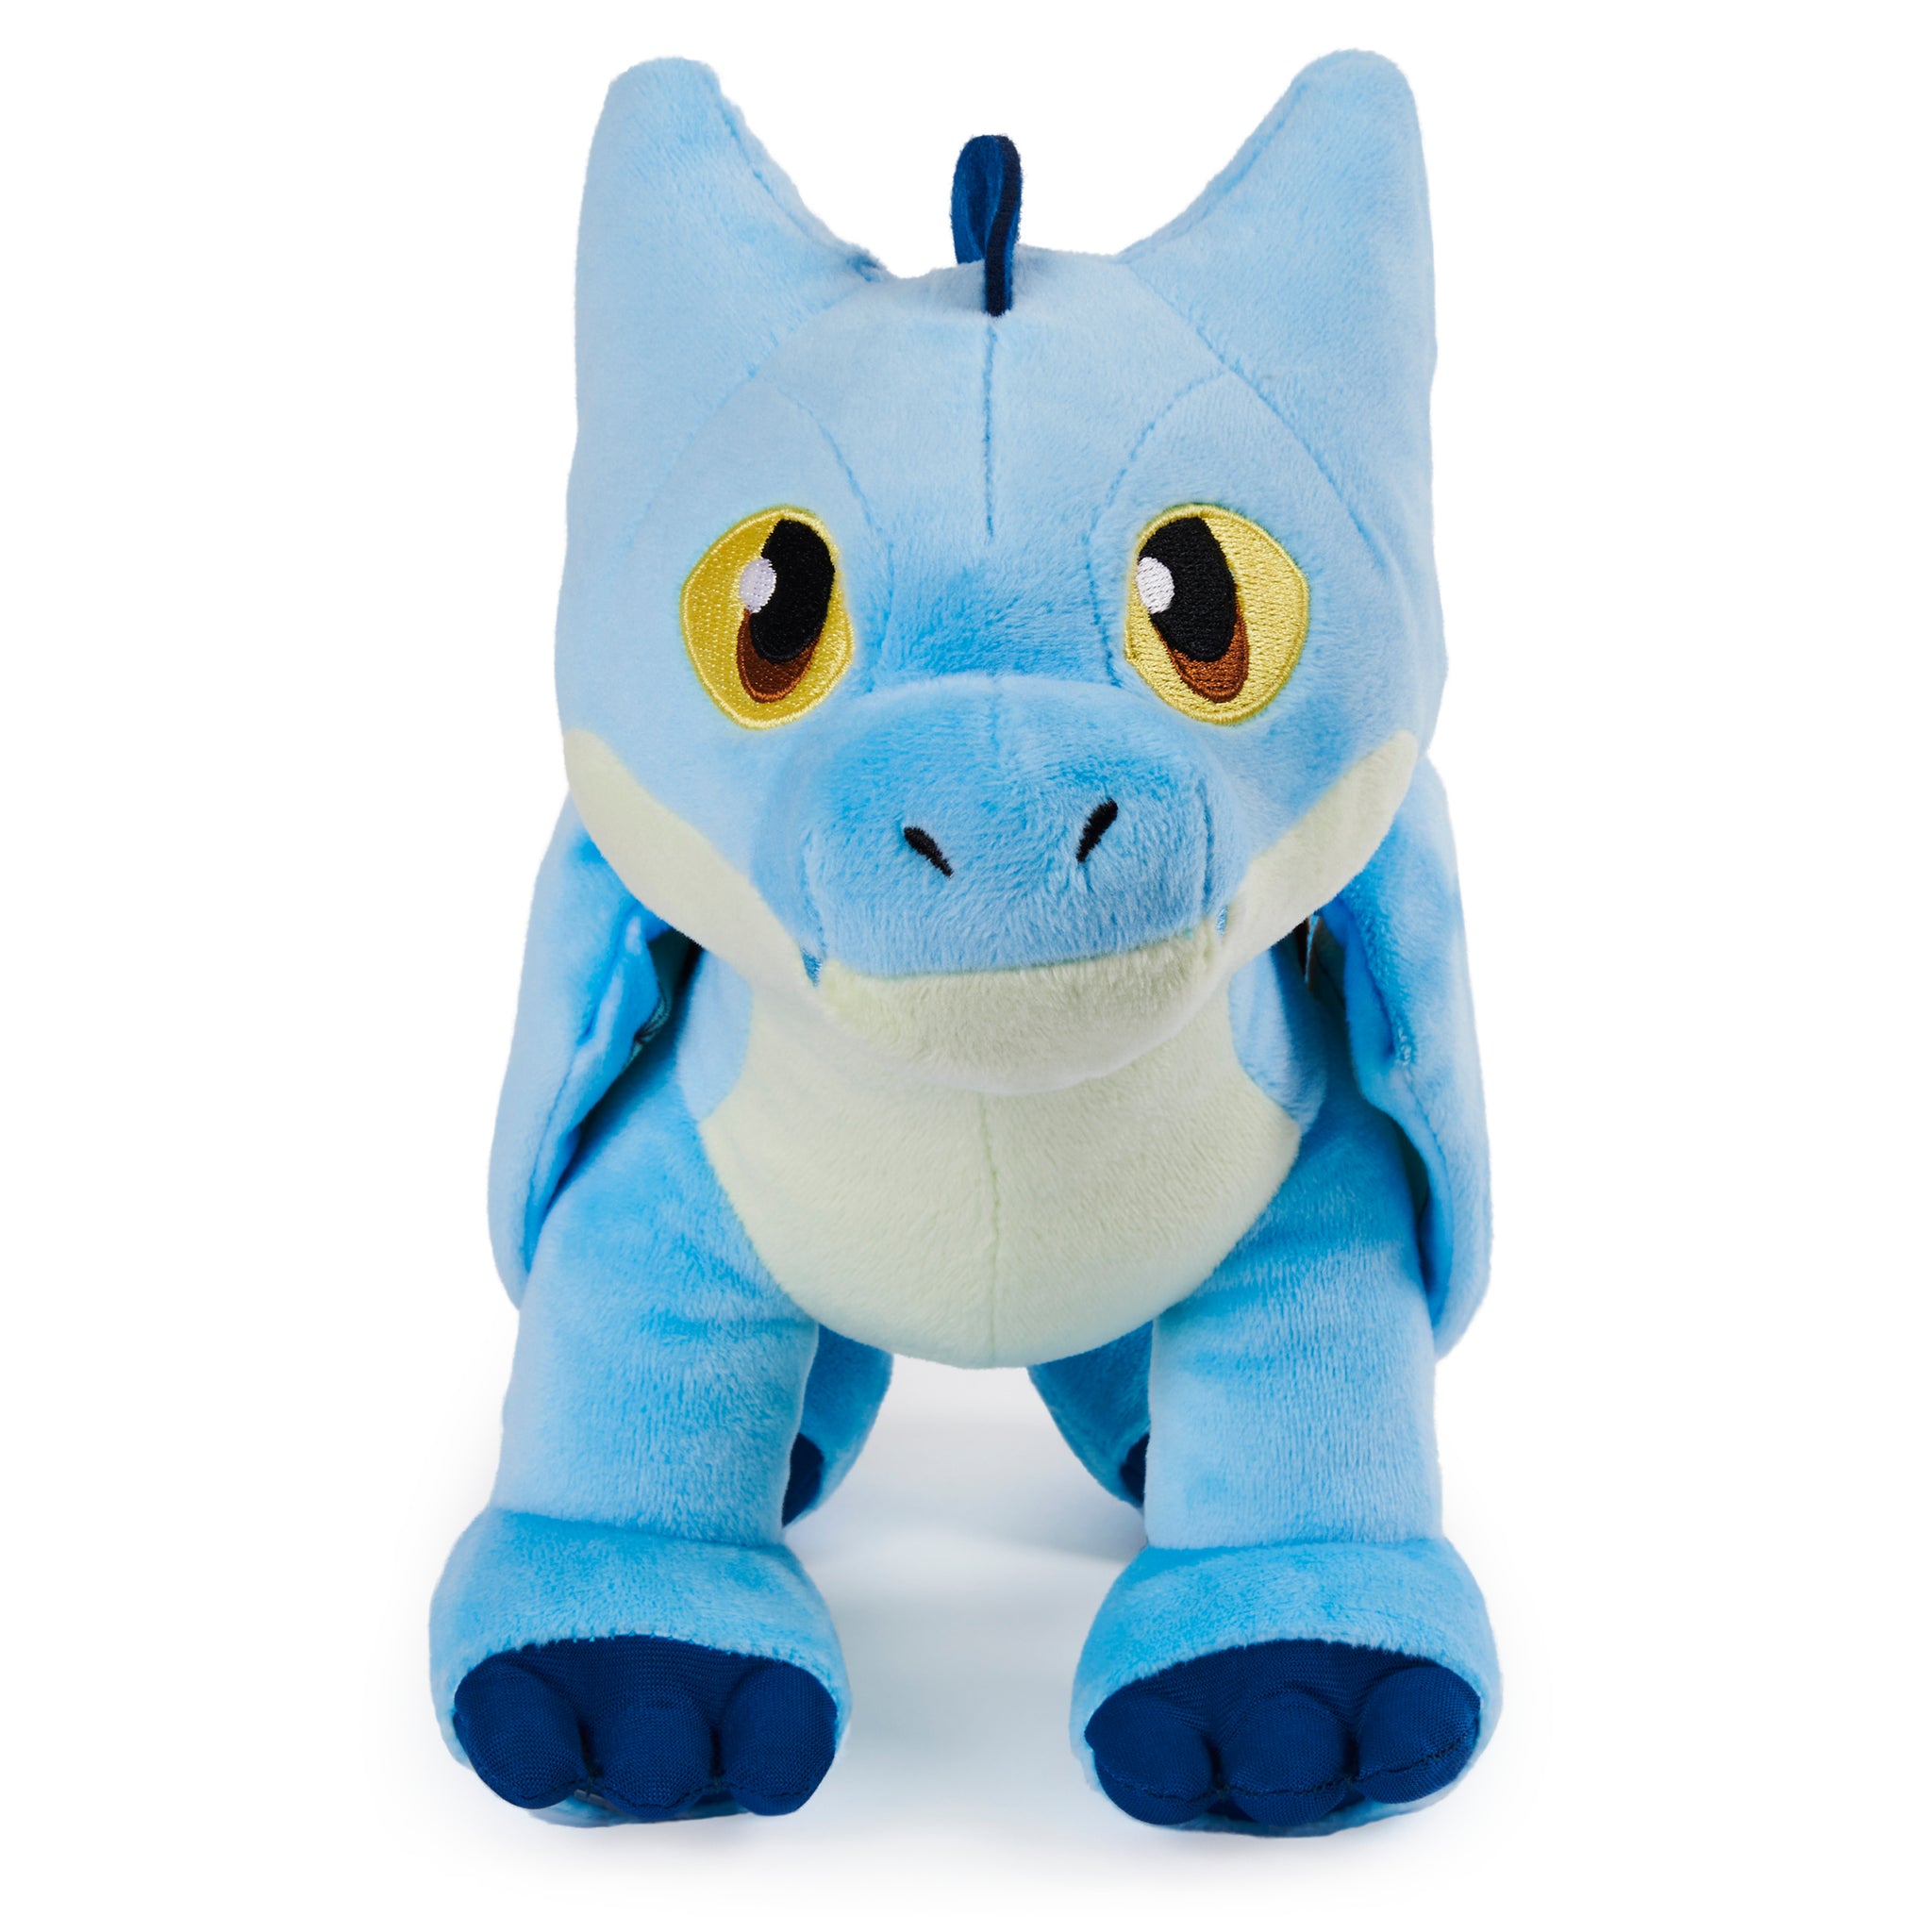 DreamWorks Dragons Rescue Riders, Deluxe Winger 15-inch Plush Dragon with Moving Wings